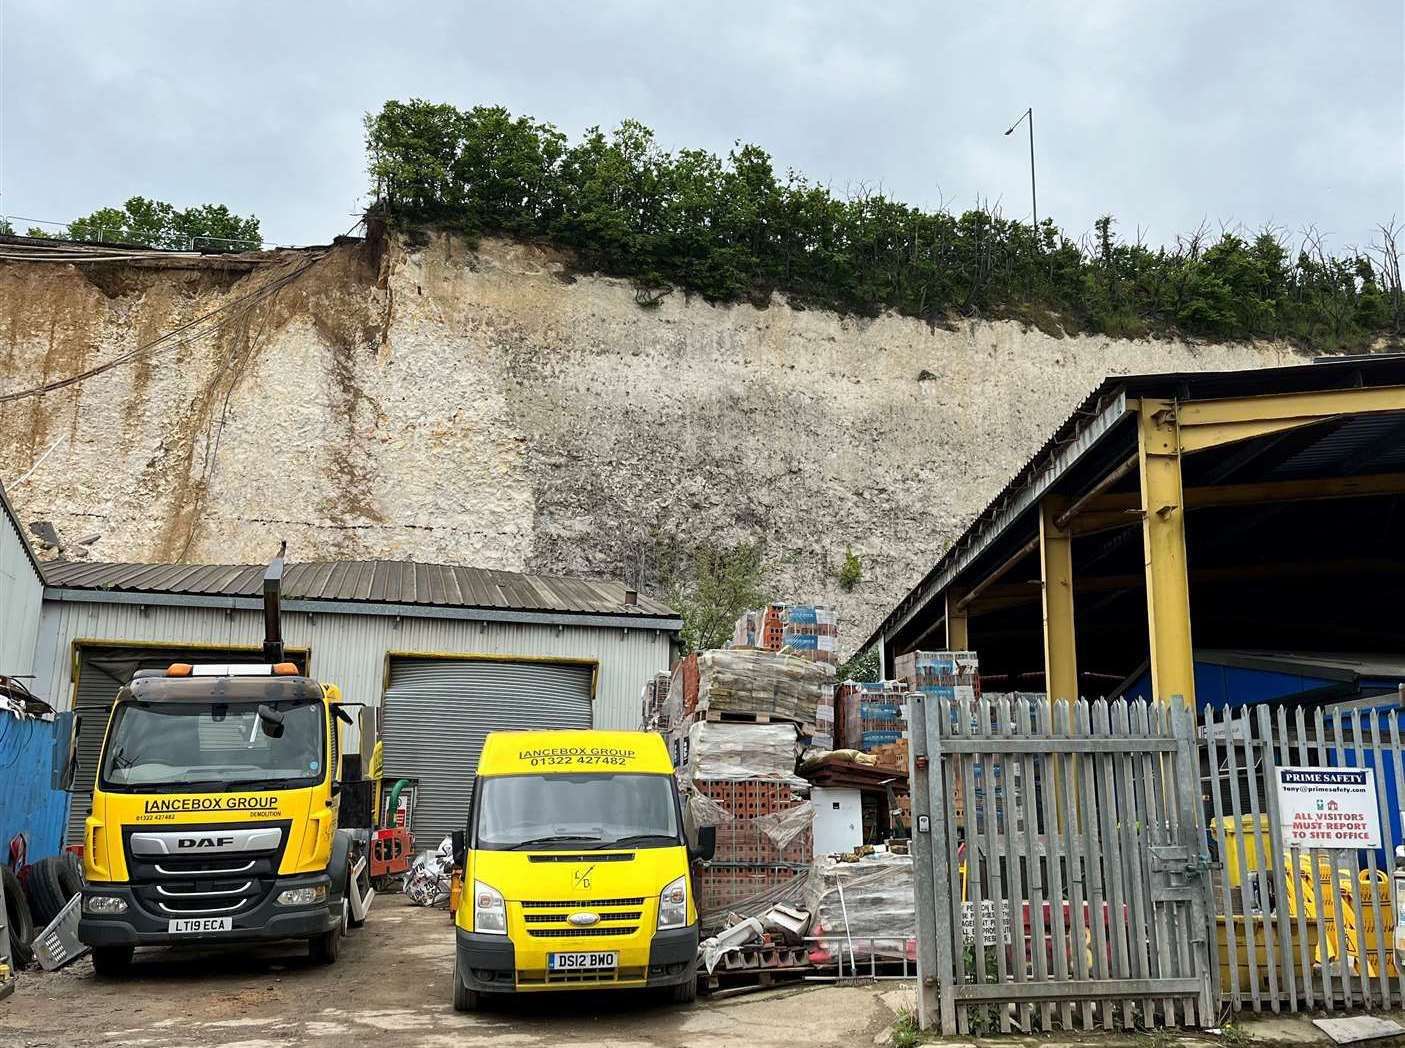 Lancebox Ltd in Manor Way Business Park, Swanscombe has been badly impacted by the landslip